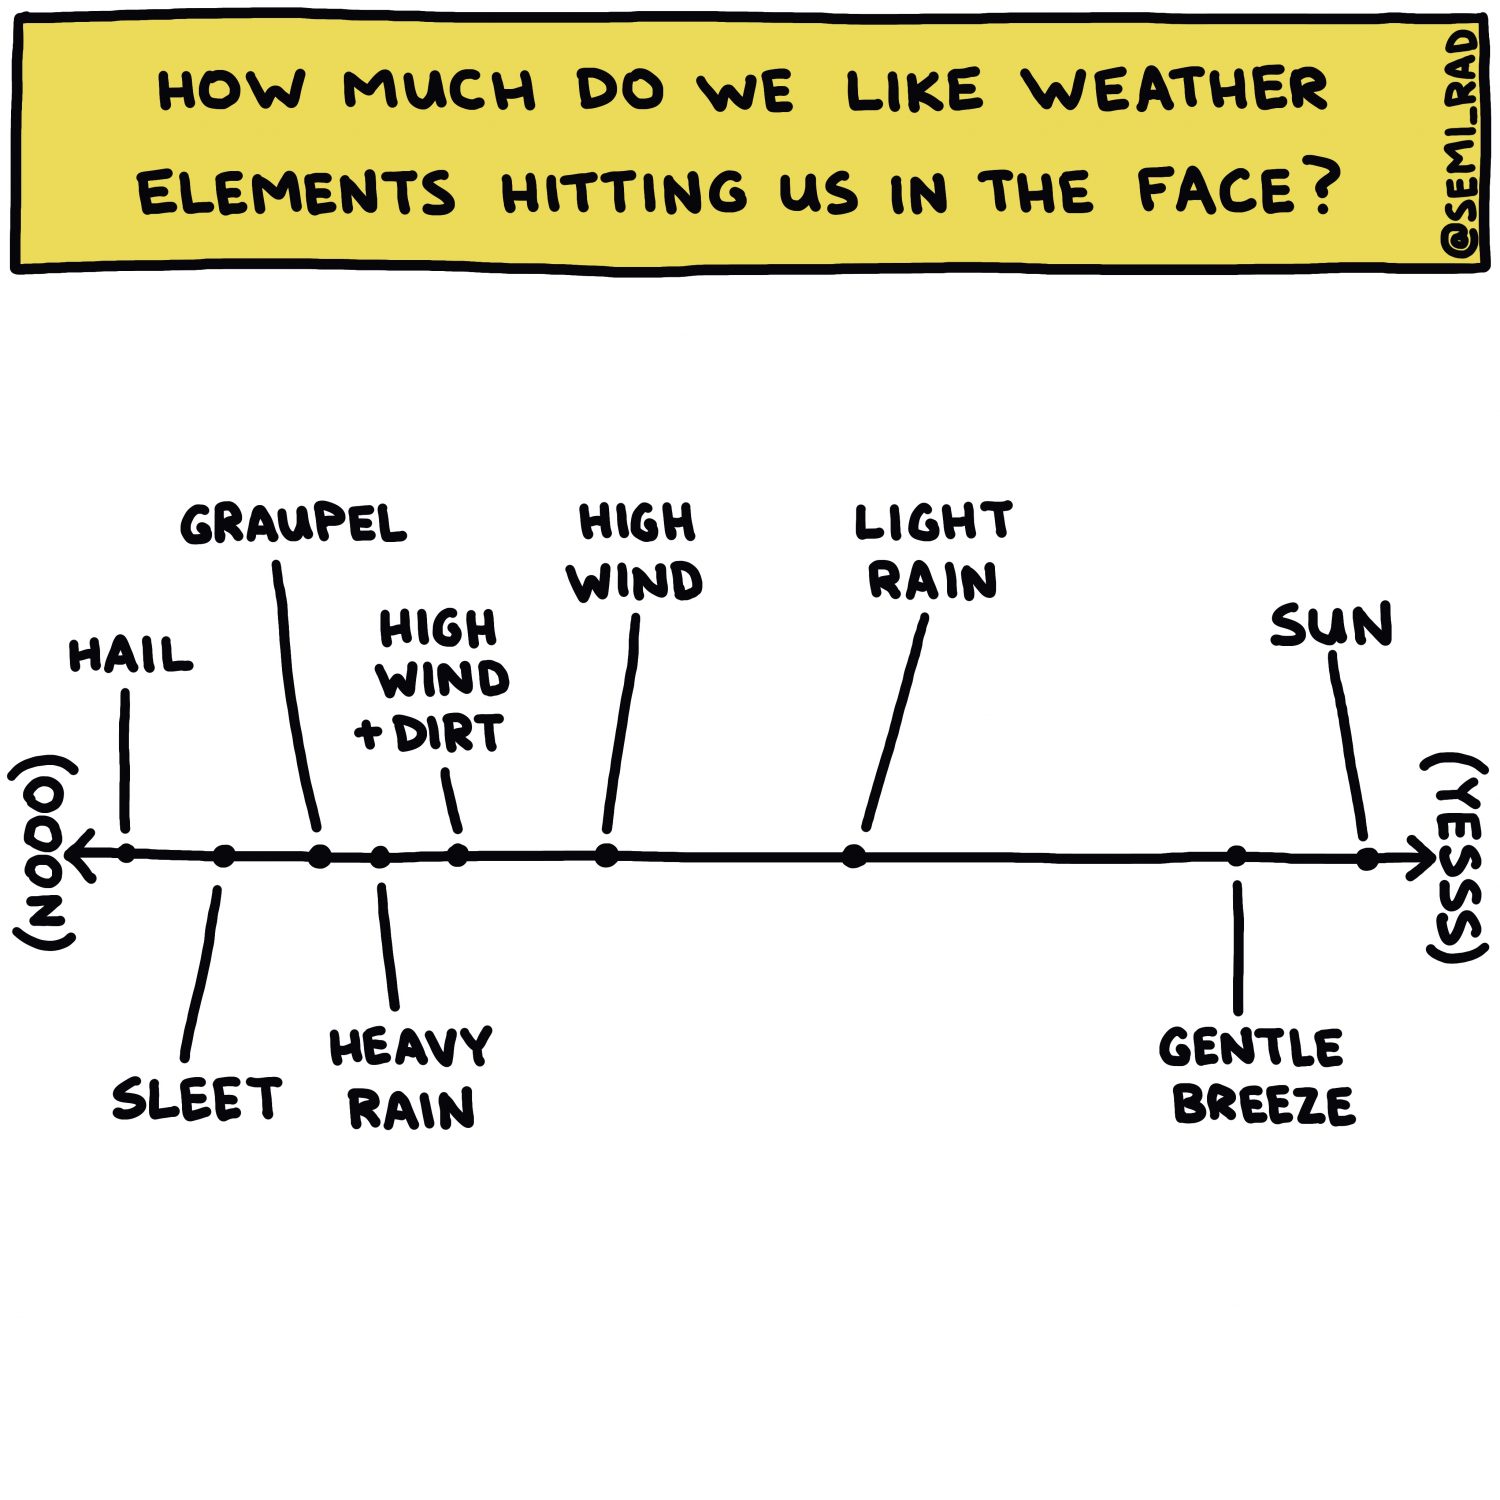 How Much Do We Like Weather Elements Hitting Us In The Face?